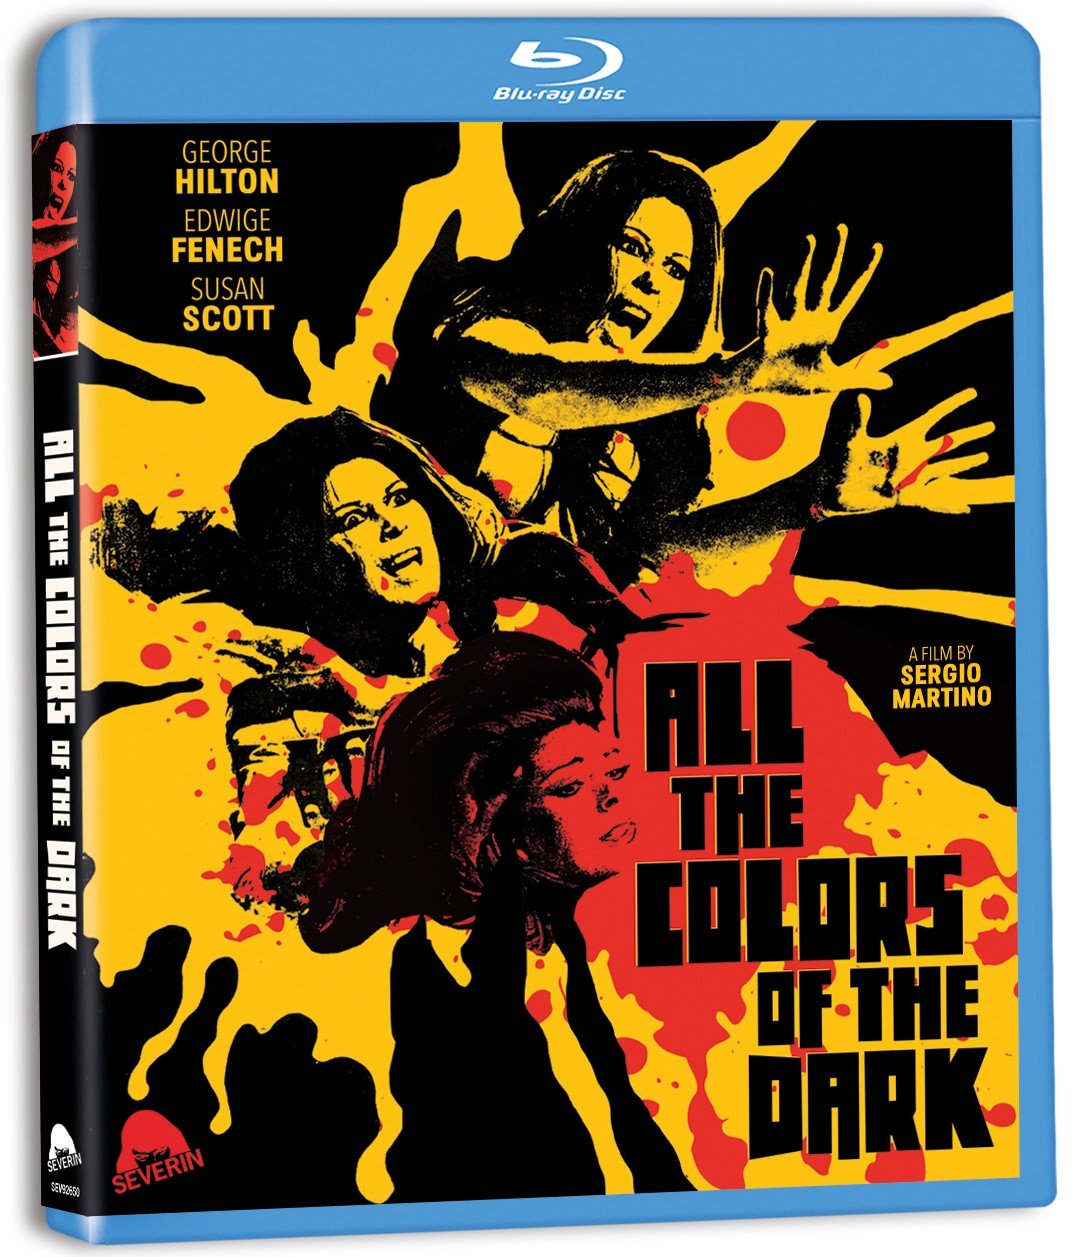 The　Colors Blu-ray